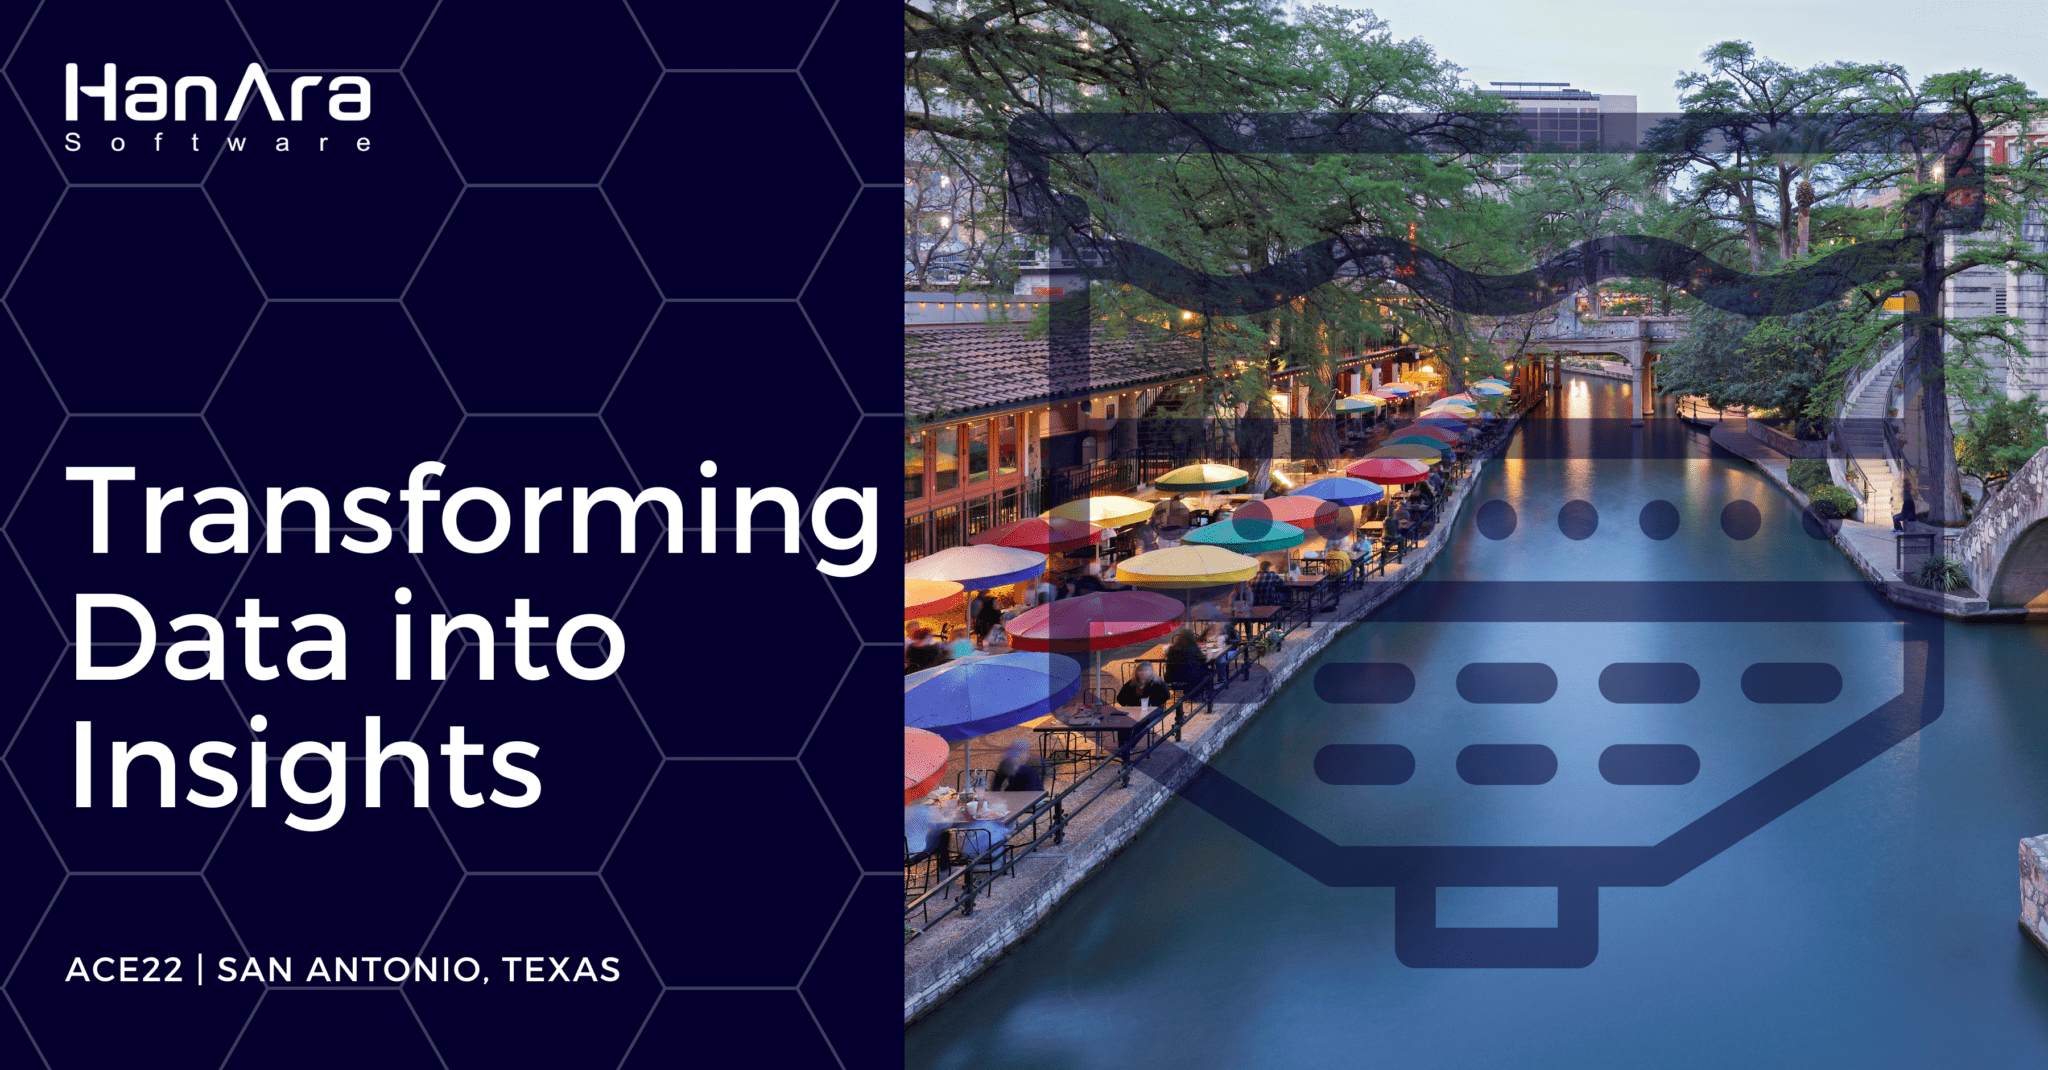 Transforming data into insights at the ACE22 Conference in San Antonio, Texas